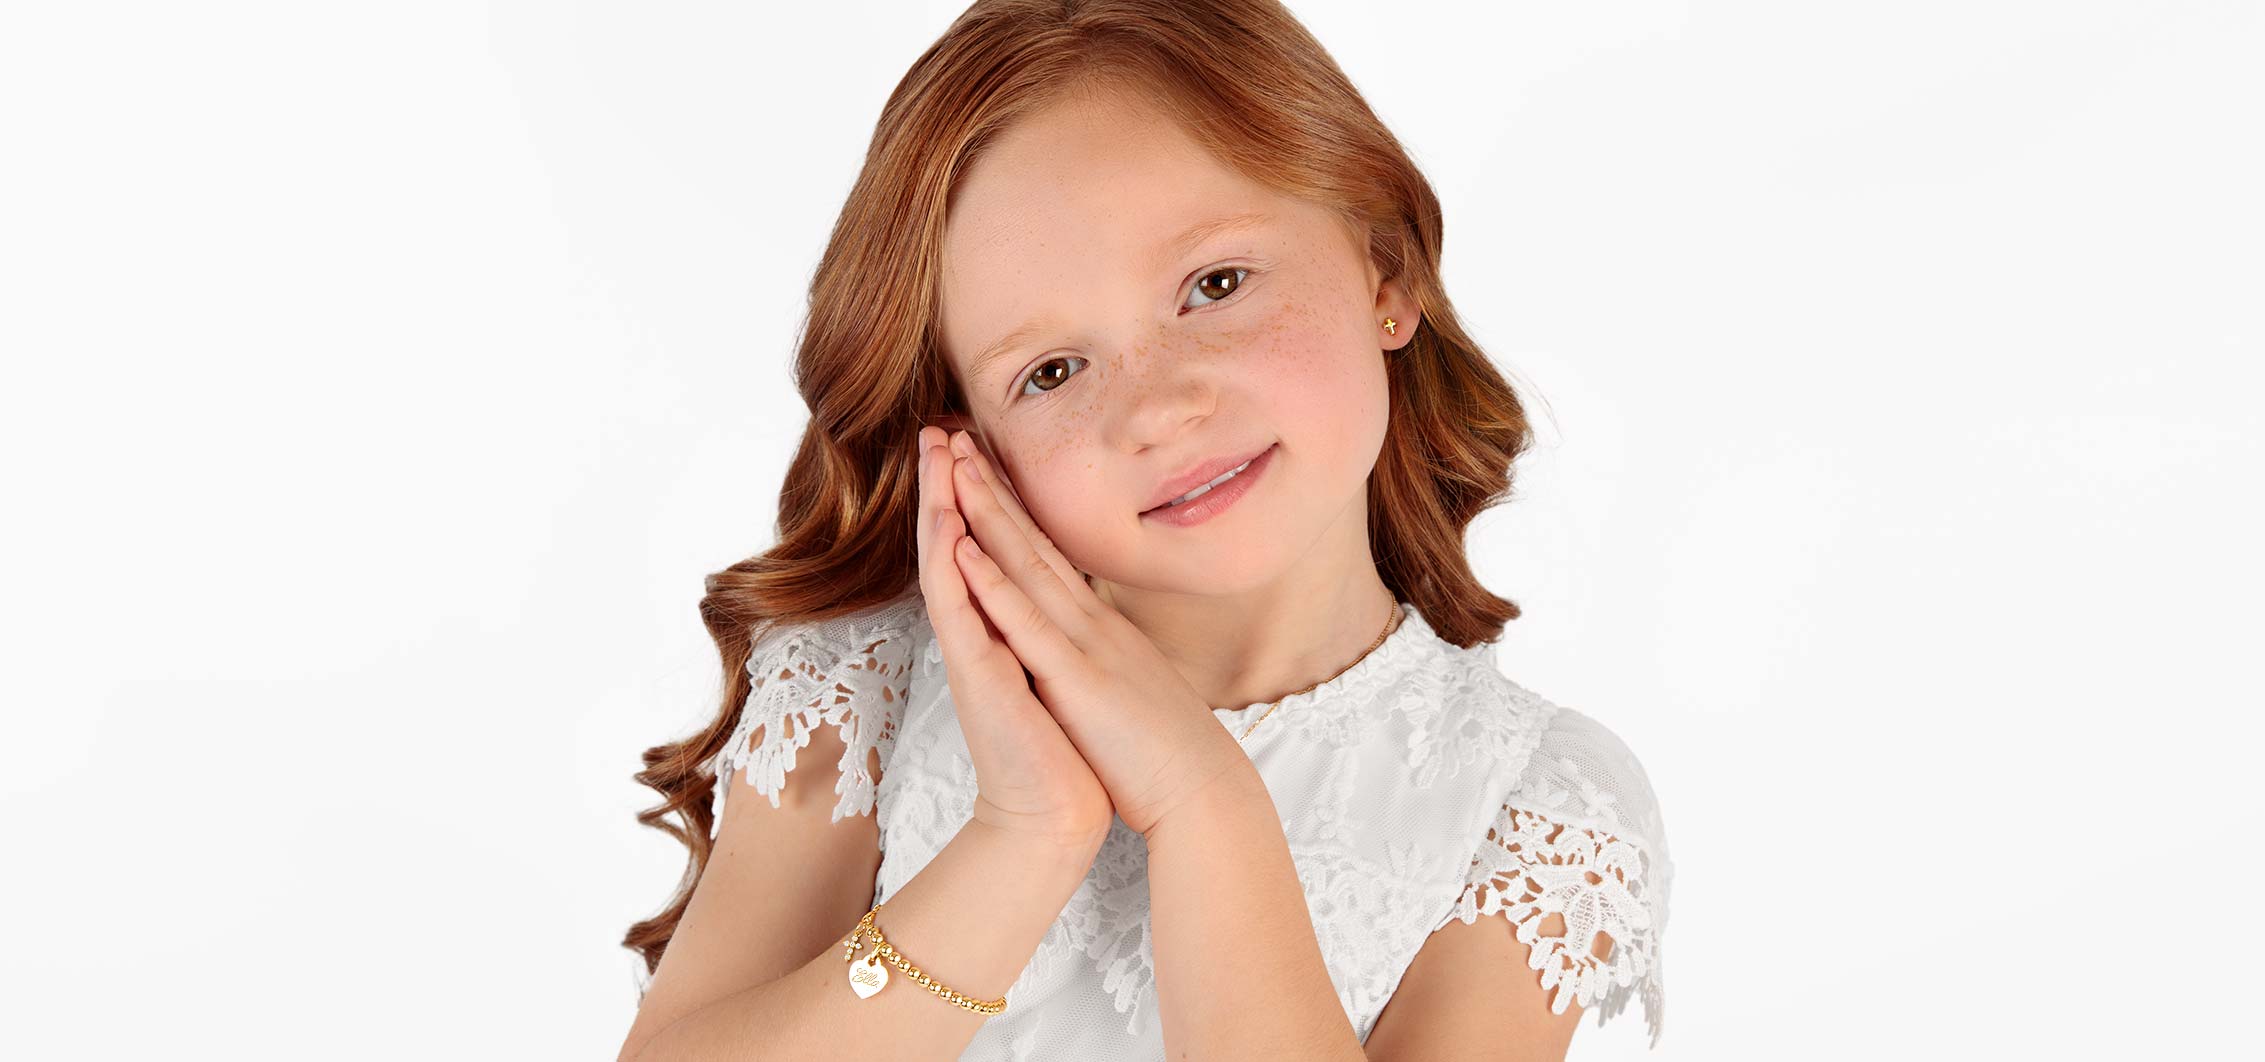 Religious Bracelets for Child's First Holy Communion